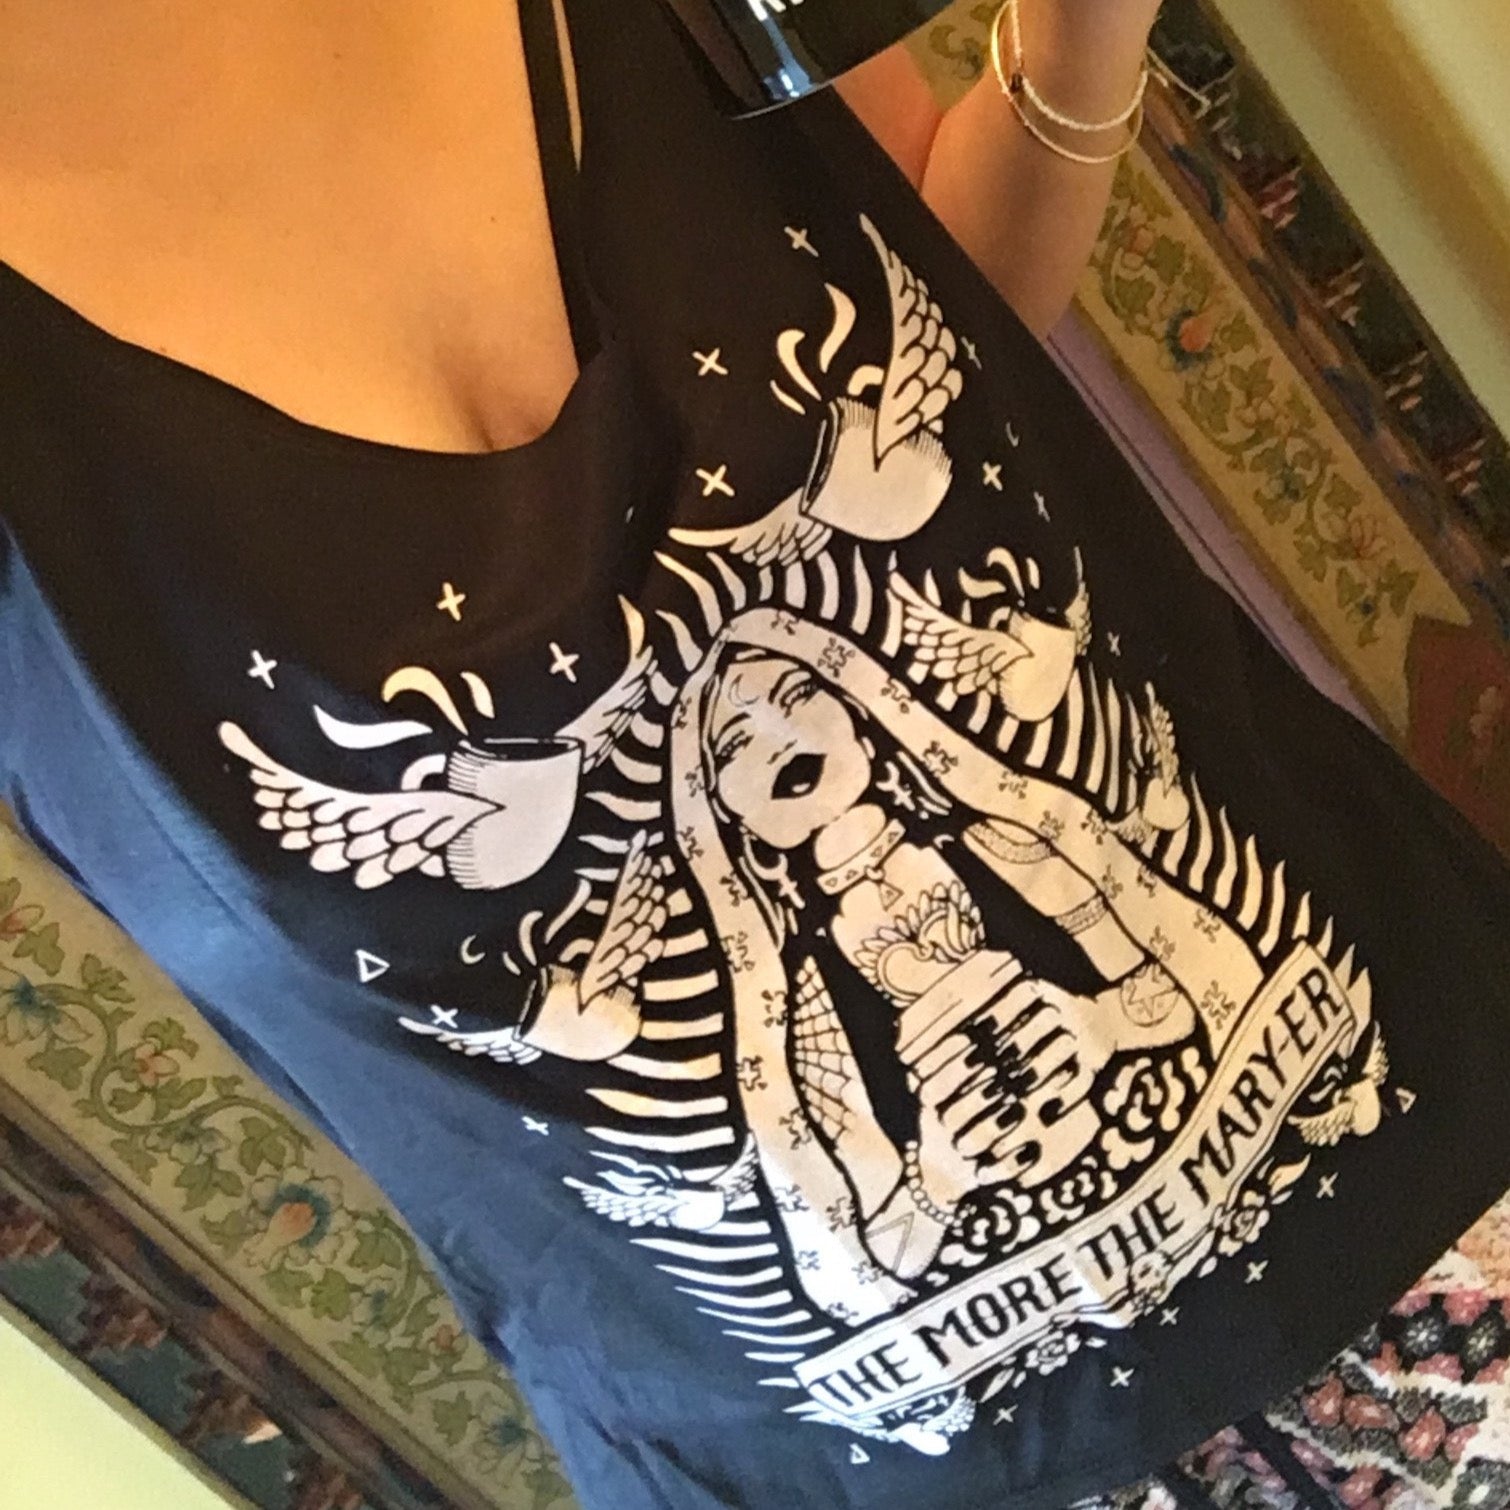 « THE MORE THE MARY-ER » WOMEN'S SLOUCHY TANK